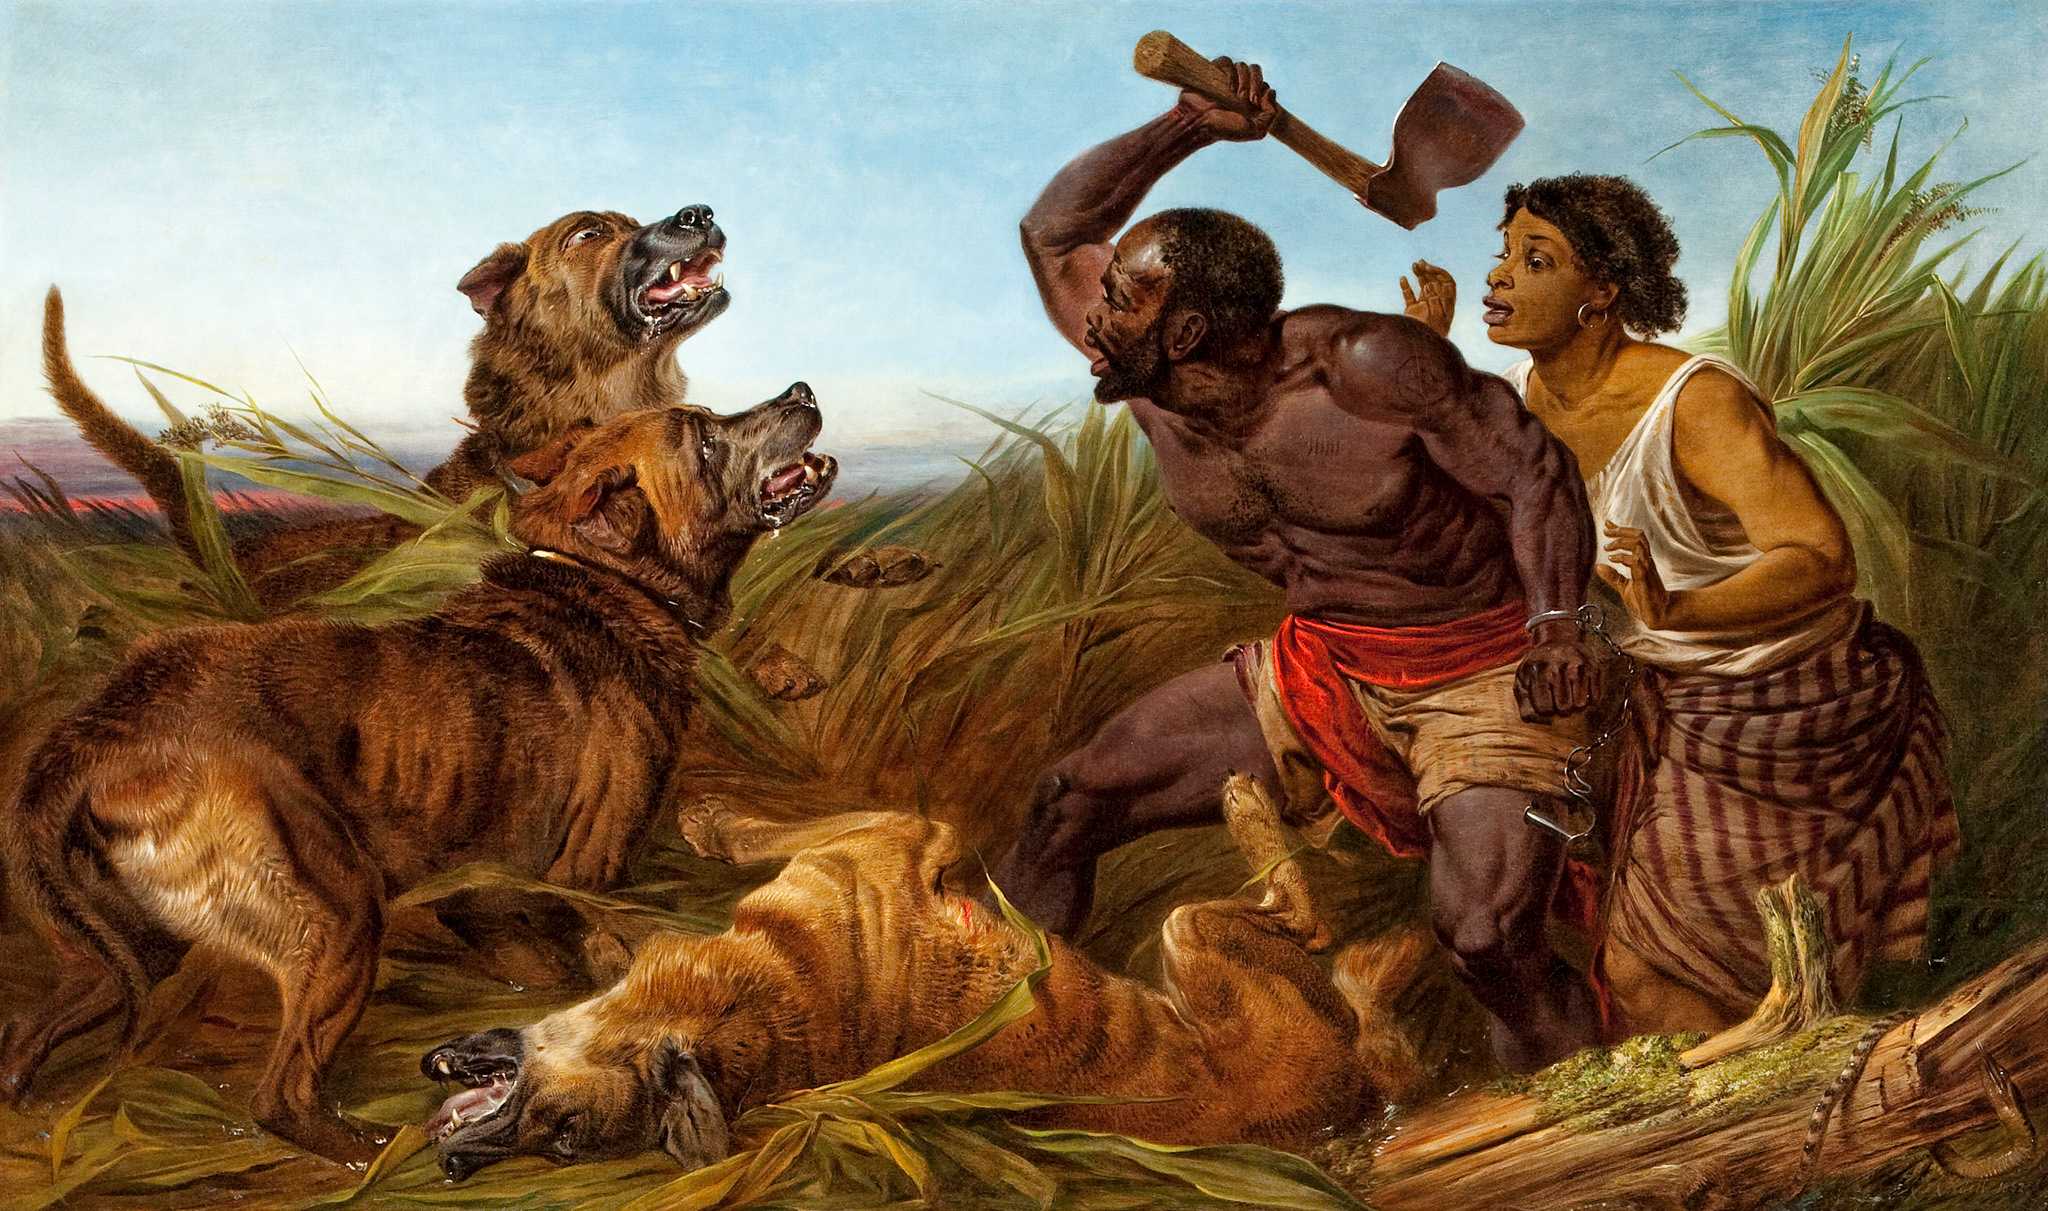 This oil painting depicts a fugitive enslaved man and woman beset by three mastiff dogs in a marshy landscape. On the right side of the painting are two human figures who face left across the painting to the dogs.The man stands in a half-crouch between the dogs and the woman, wielding a hatchet in his upraised right hand. Dangling from his clenched left wrist is a pair of manacles, with one cuff broken open. He wears a pair of faintly patterned brown trousers to mid-thigh, and has a red sash around his waist. His body has numerous scars and a round brand or tattoo on his left shoulder. The woman is half-crouched behind him knees bent, both arms raised to shoulder height, palms faced outward as she peers over the man's shoulder. She wears a sleeveless, loosely draped soiled white top, and a brown striped skirt tucked above her knees. Her hair is drawn back and she has small hoop earrings. The dogs are on the left side of the painting, with one of the dogs lying wounded between the two groups of figures. The scene takes place in an area of trampled tall grass with grey water in the background and a livid red horizon. In the bottom right corner there is a striped snake twining up a mossy dead log.